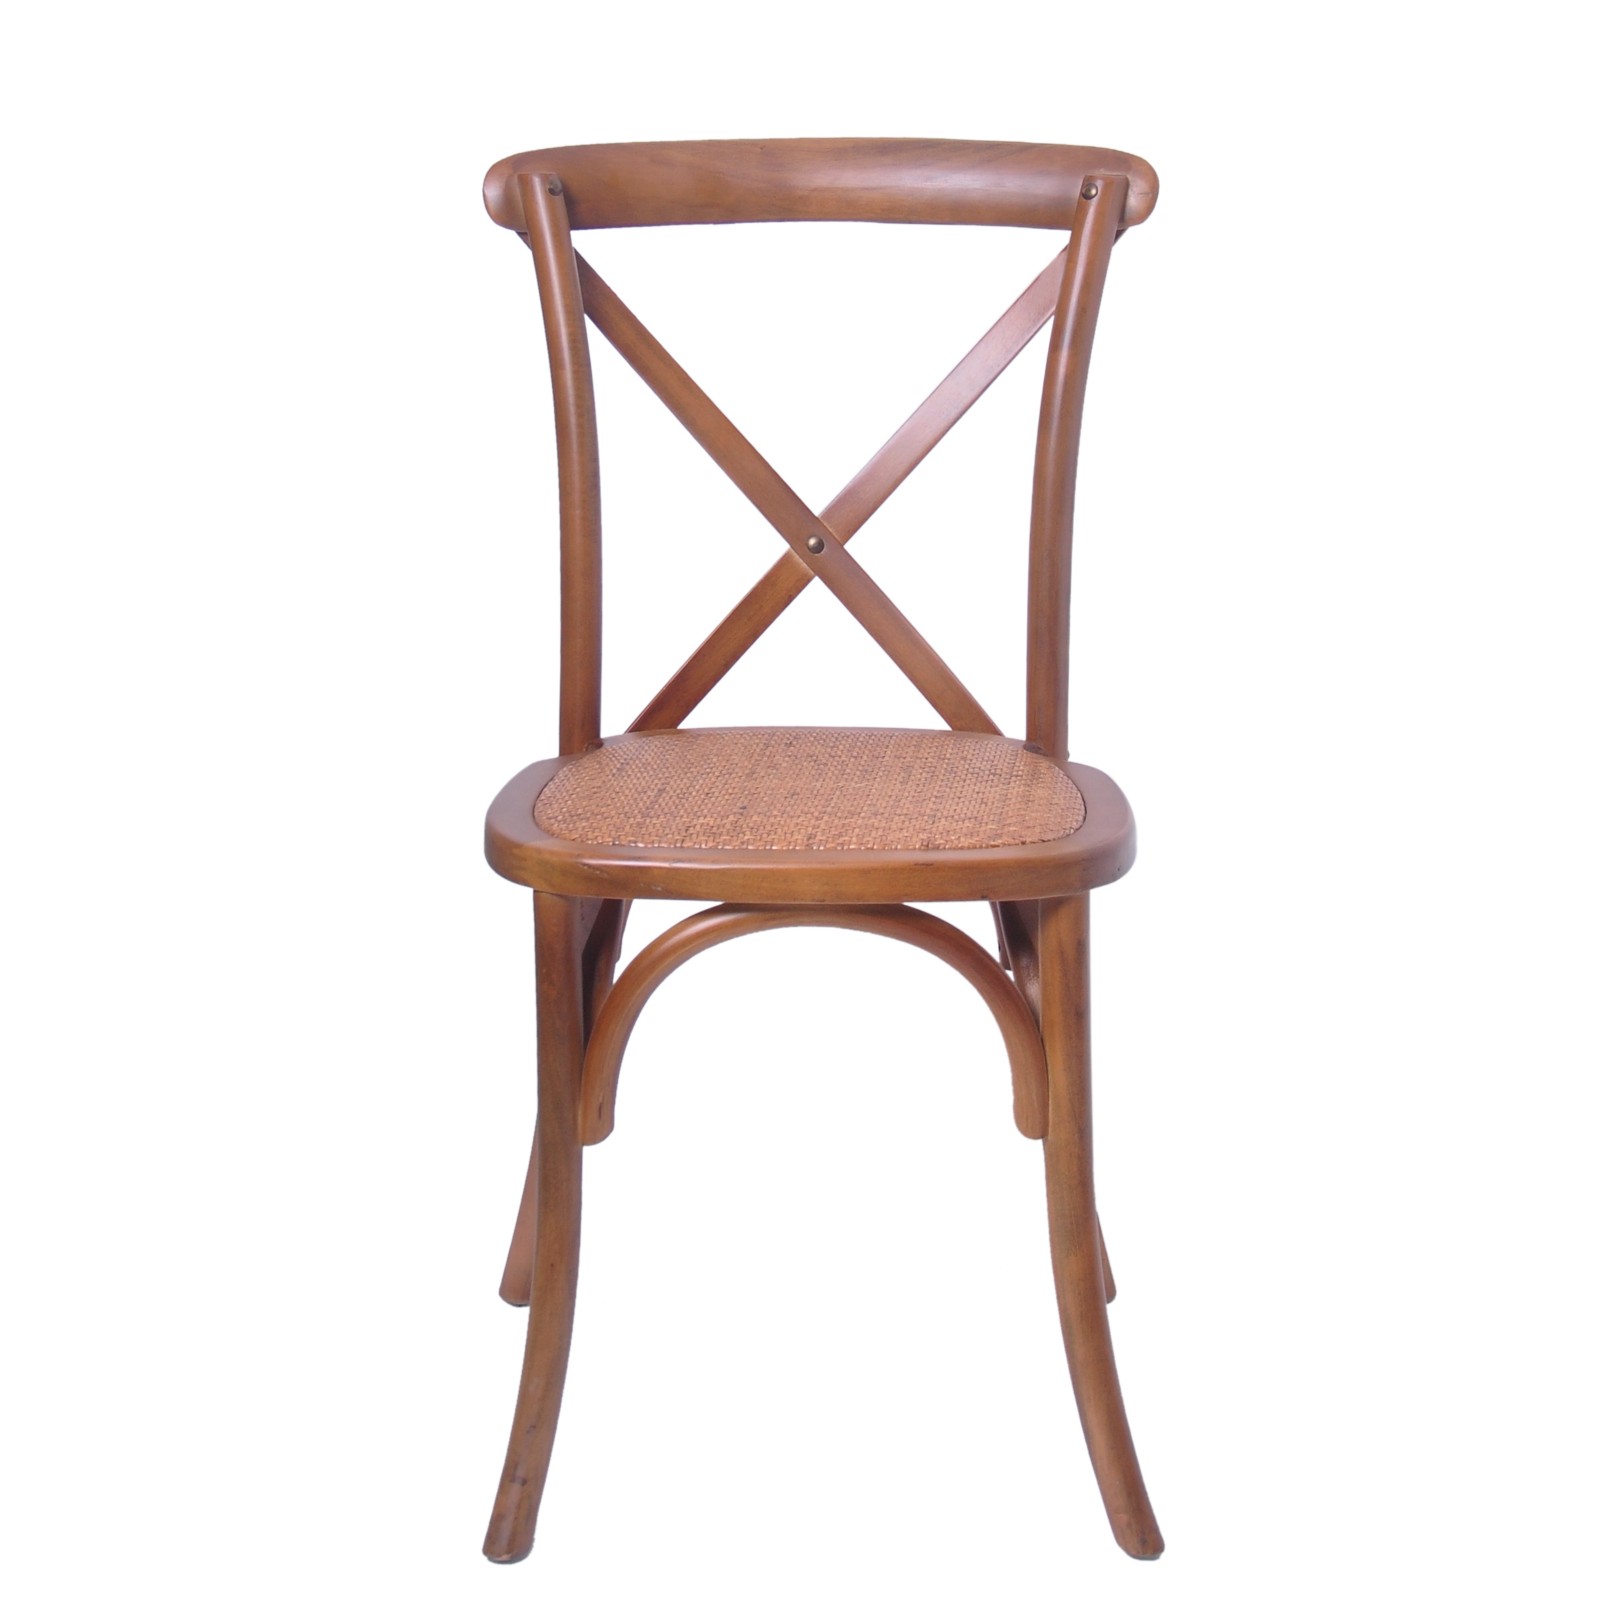 Rustic Sonoma Cross Back Chair With Rattan Seat suppiler.jpg